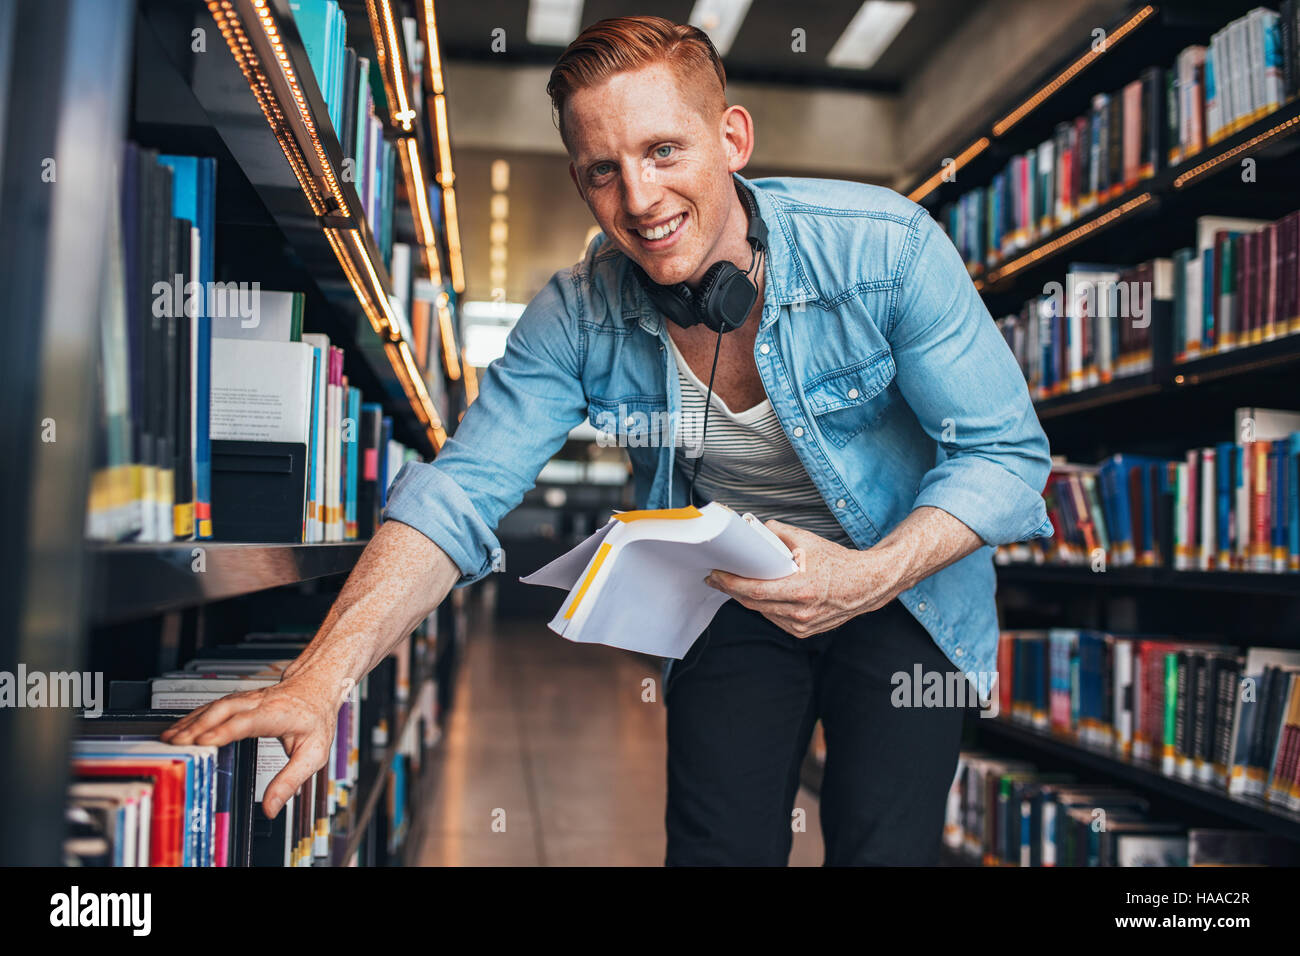 Young caucasian man finding books in public library. Finding information for his studies. Stock Photo